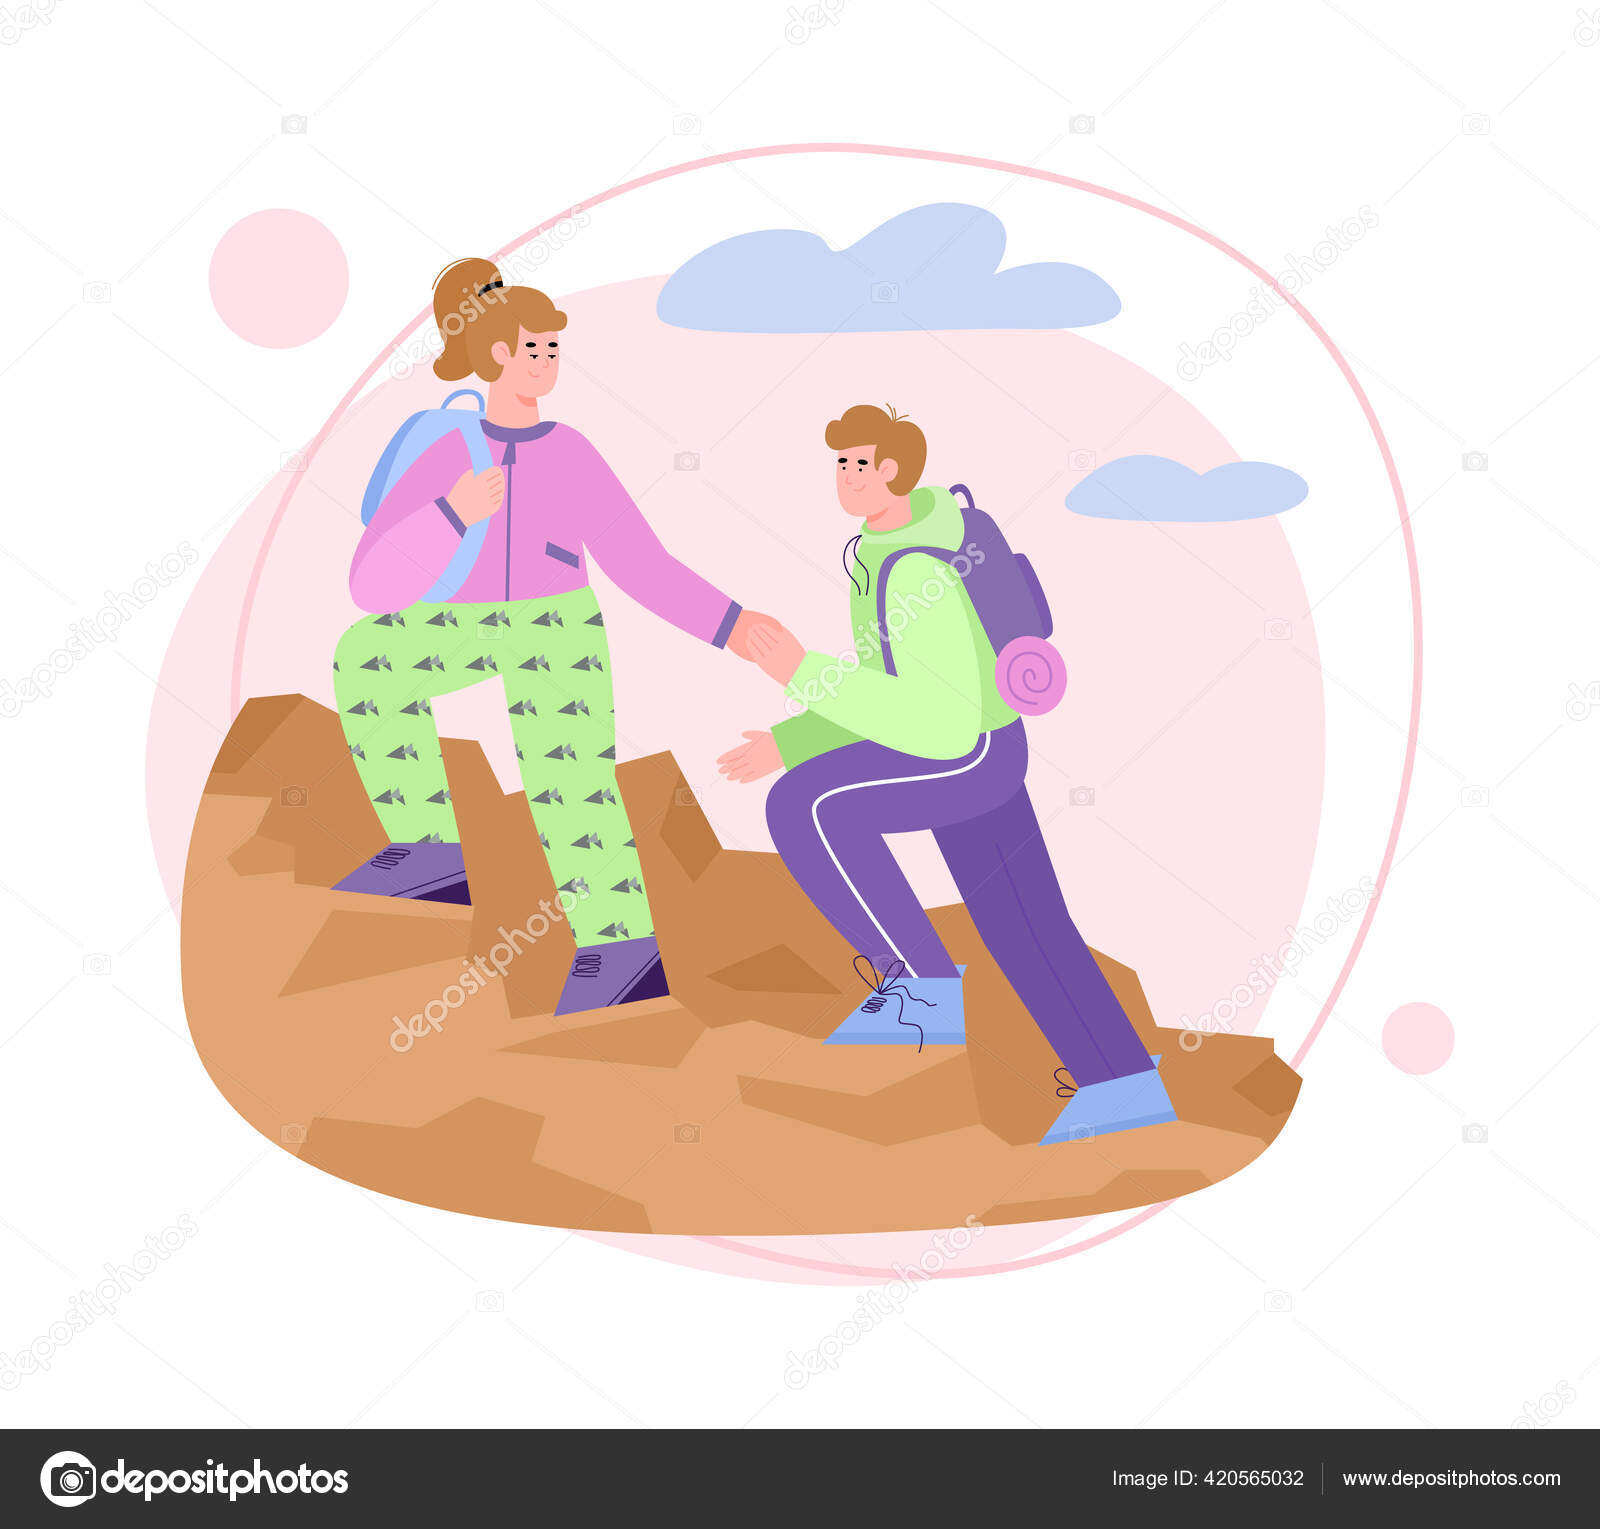 478 Helping Each Other Vector Images Free Royalty Free Helping Each Other Vectors Depositphotos